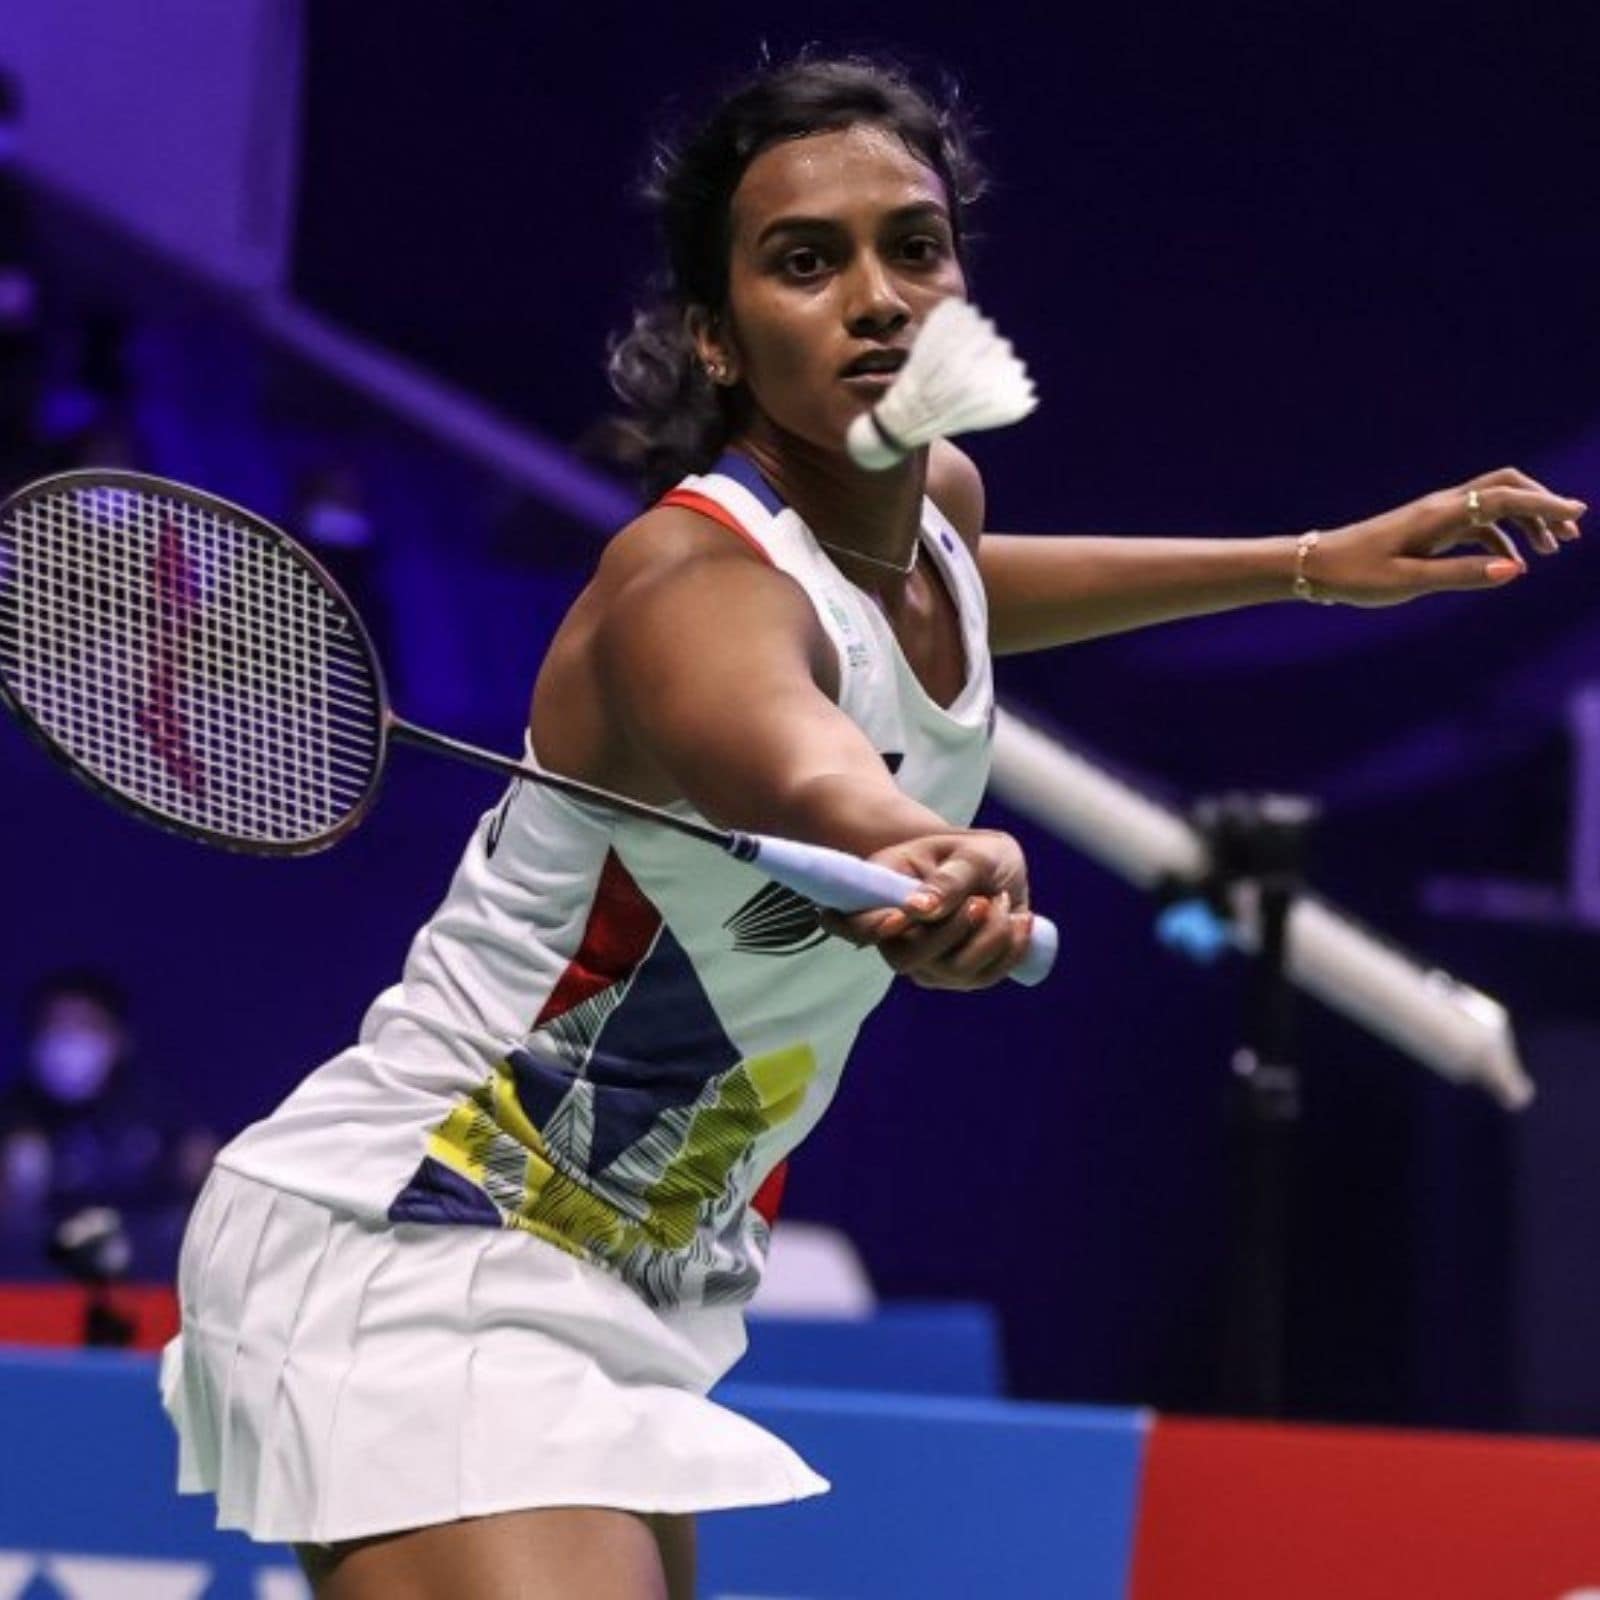 Indonesia Open PV Sindhu Earns a Hard-fought Victory Over Aya Ohori to Enter Round of 16